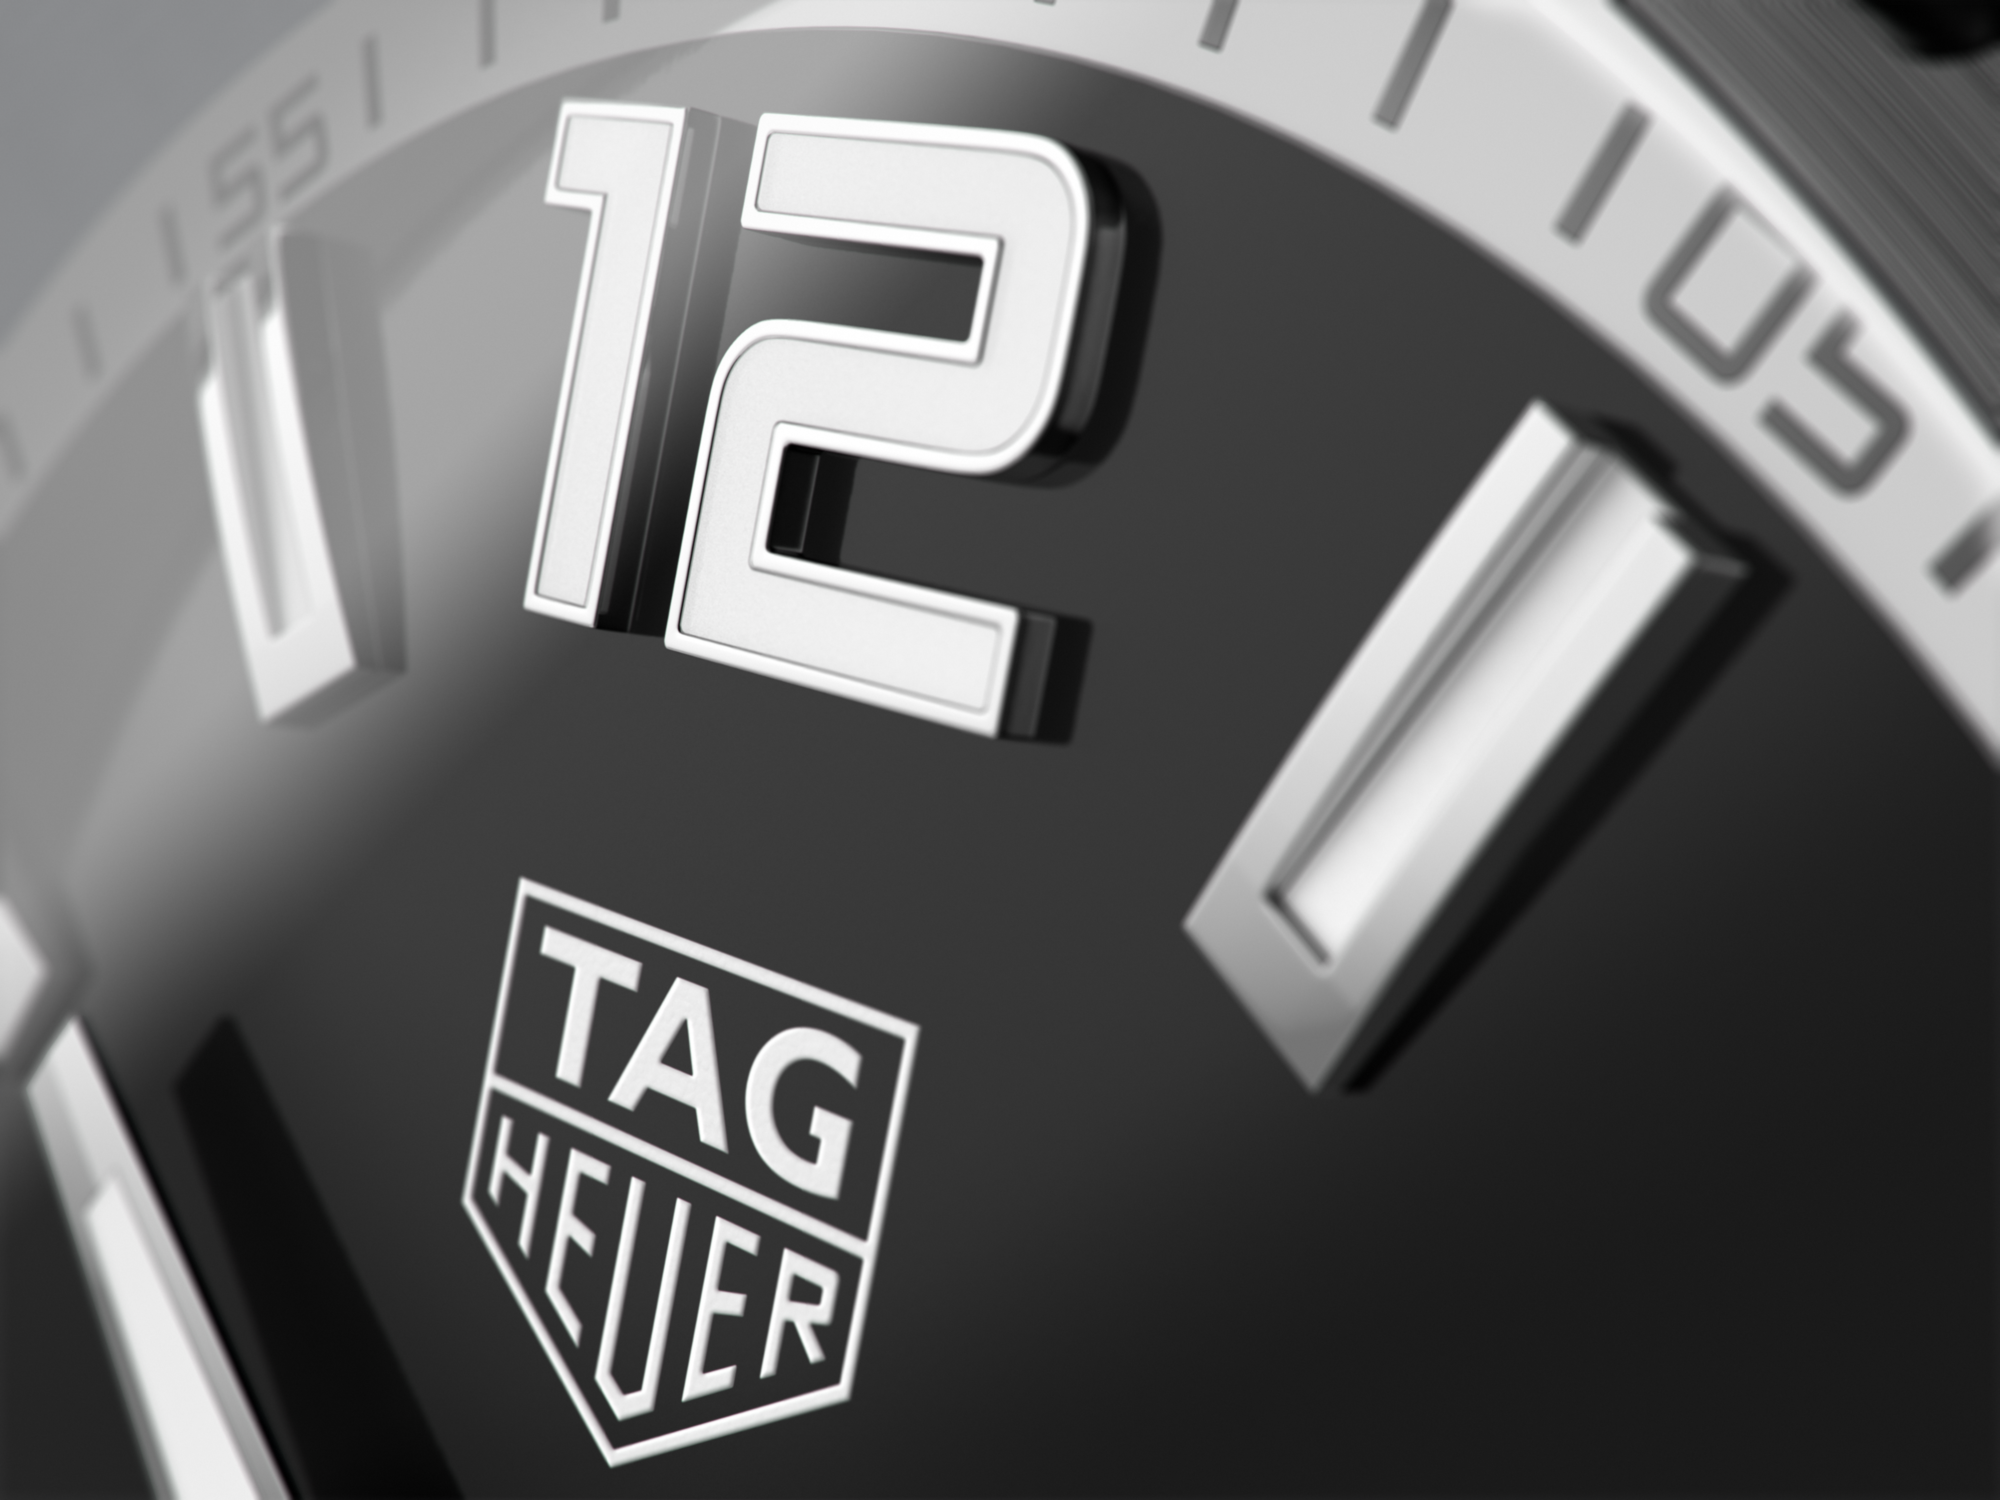 TAG Heuer TAG HEUER TAG HEUER Carrera Calibre Heuer 01 CAR2A1Z. FT6044 Black Dial Used Watches Men's Watches